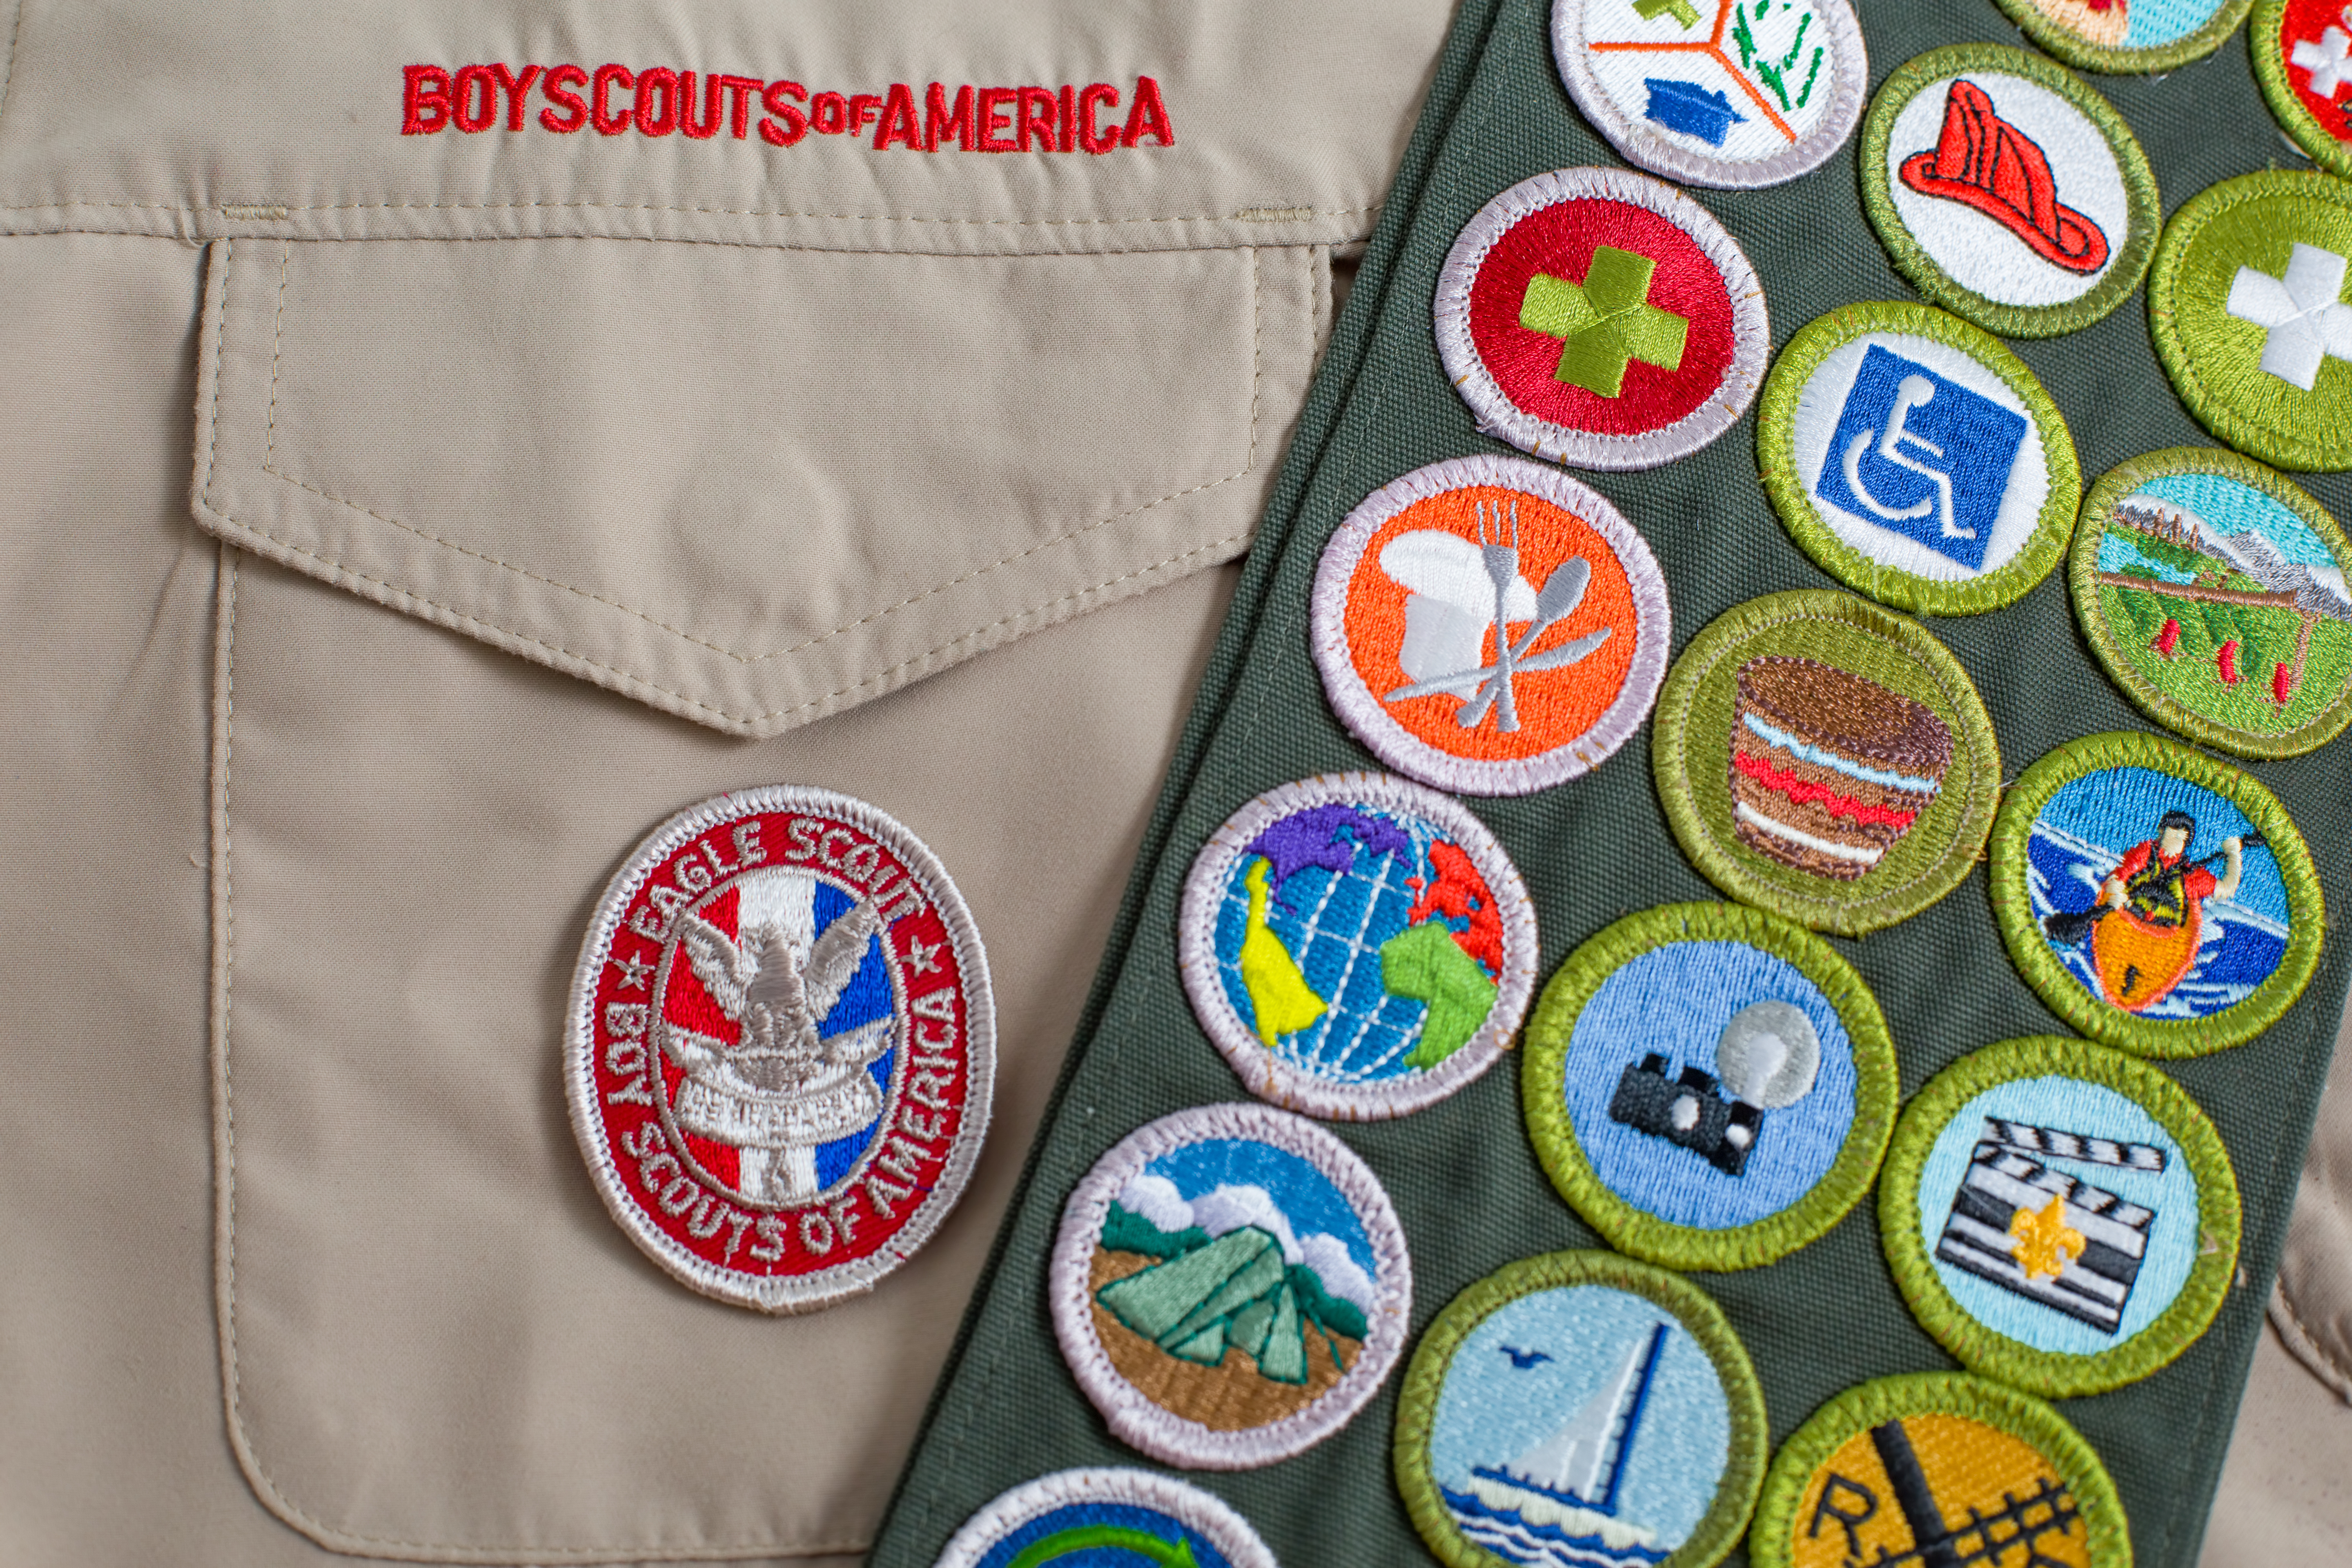 Do Not Let the “Scouts BSA” R.I.P